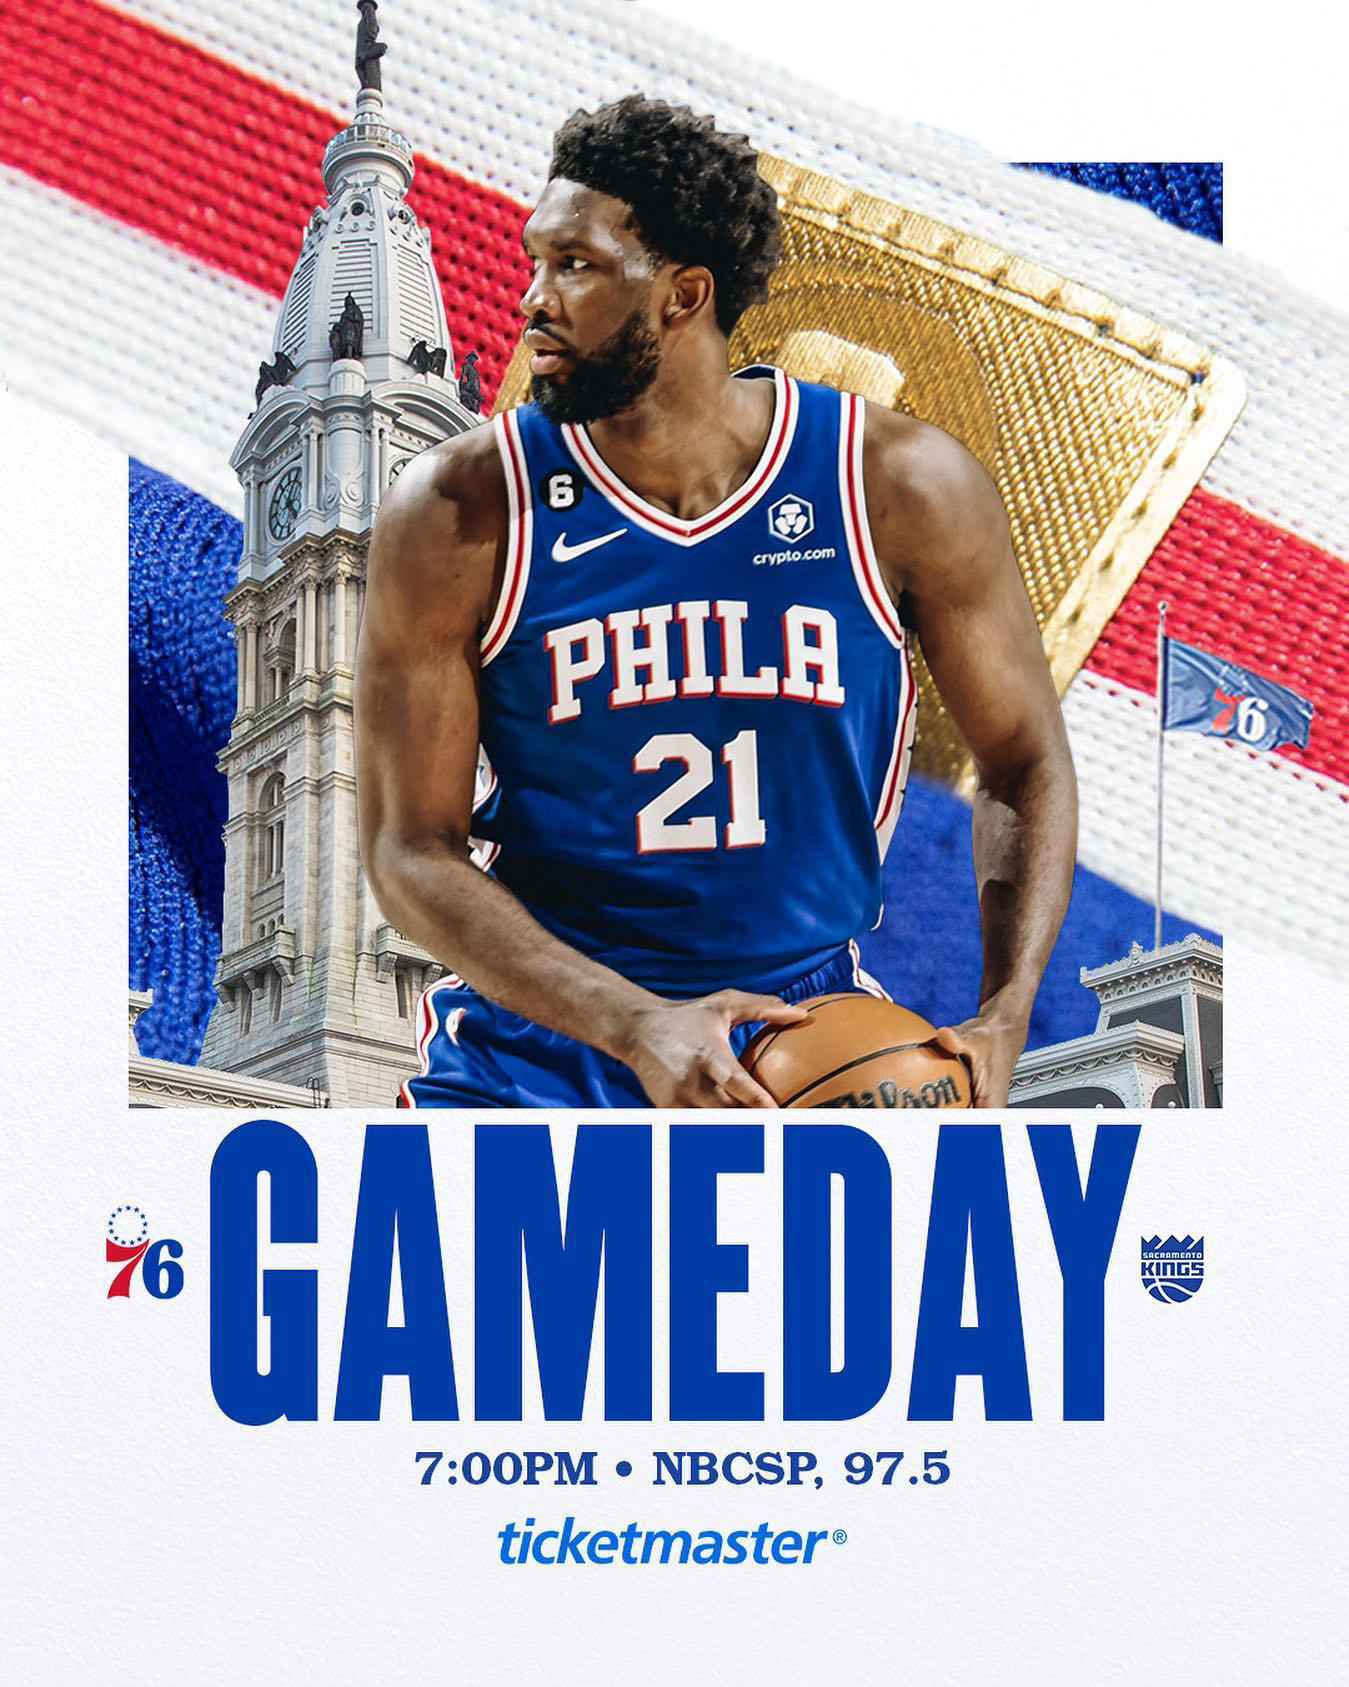 Philadelphia 76ers - be there or be square